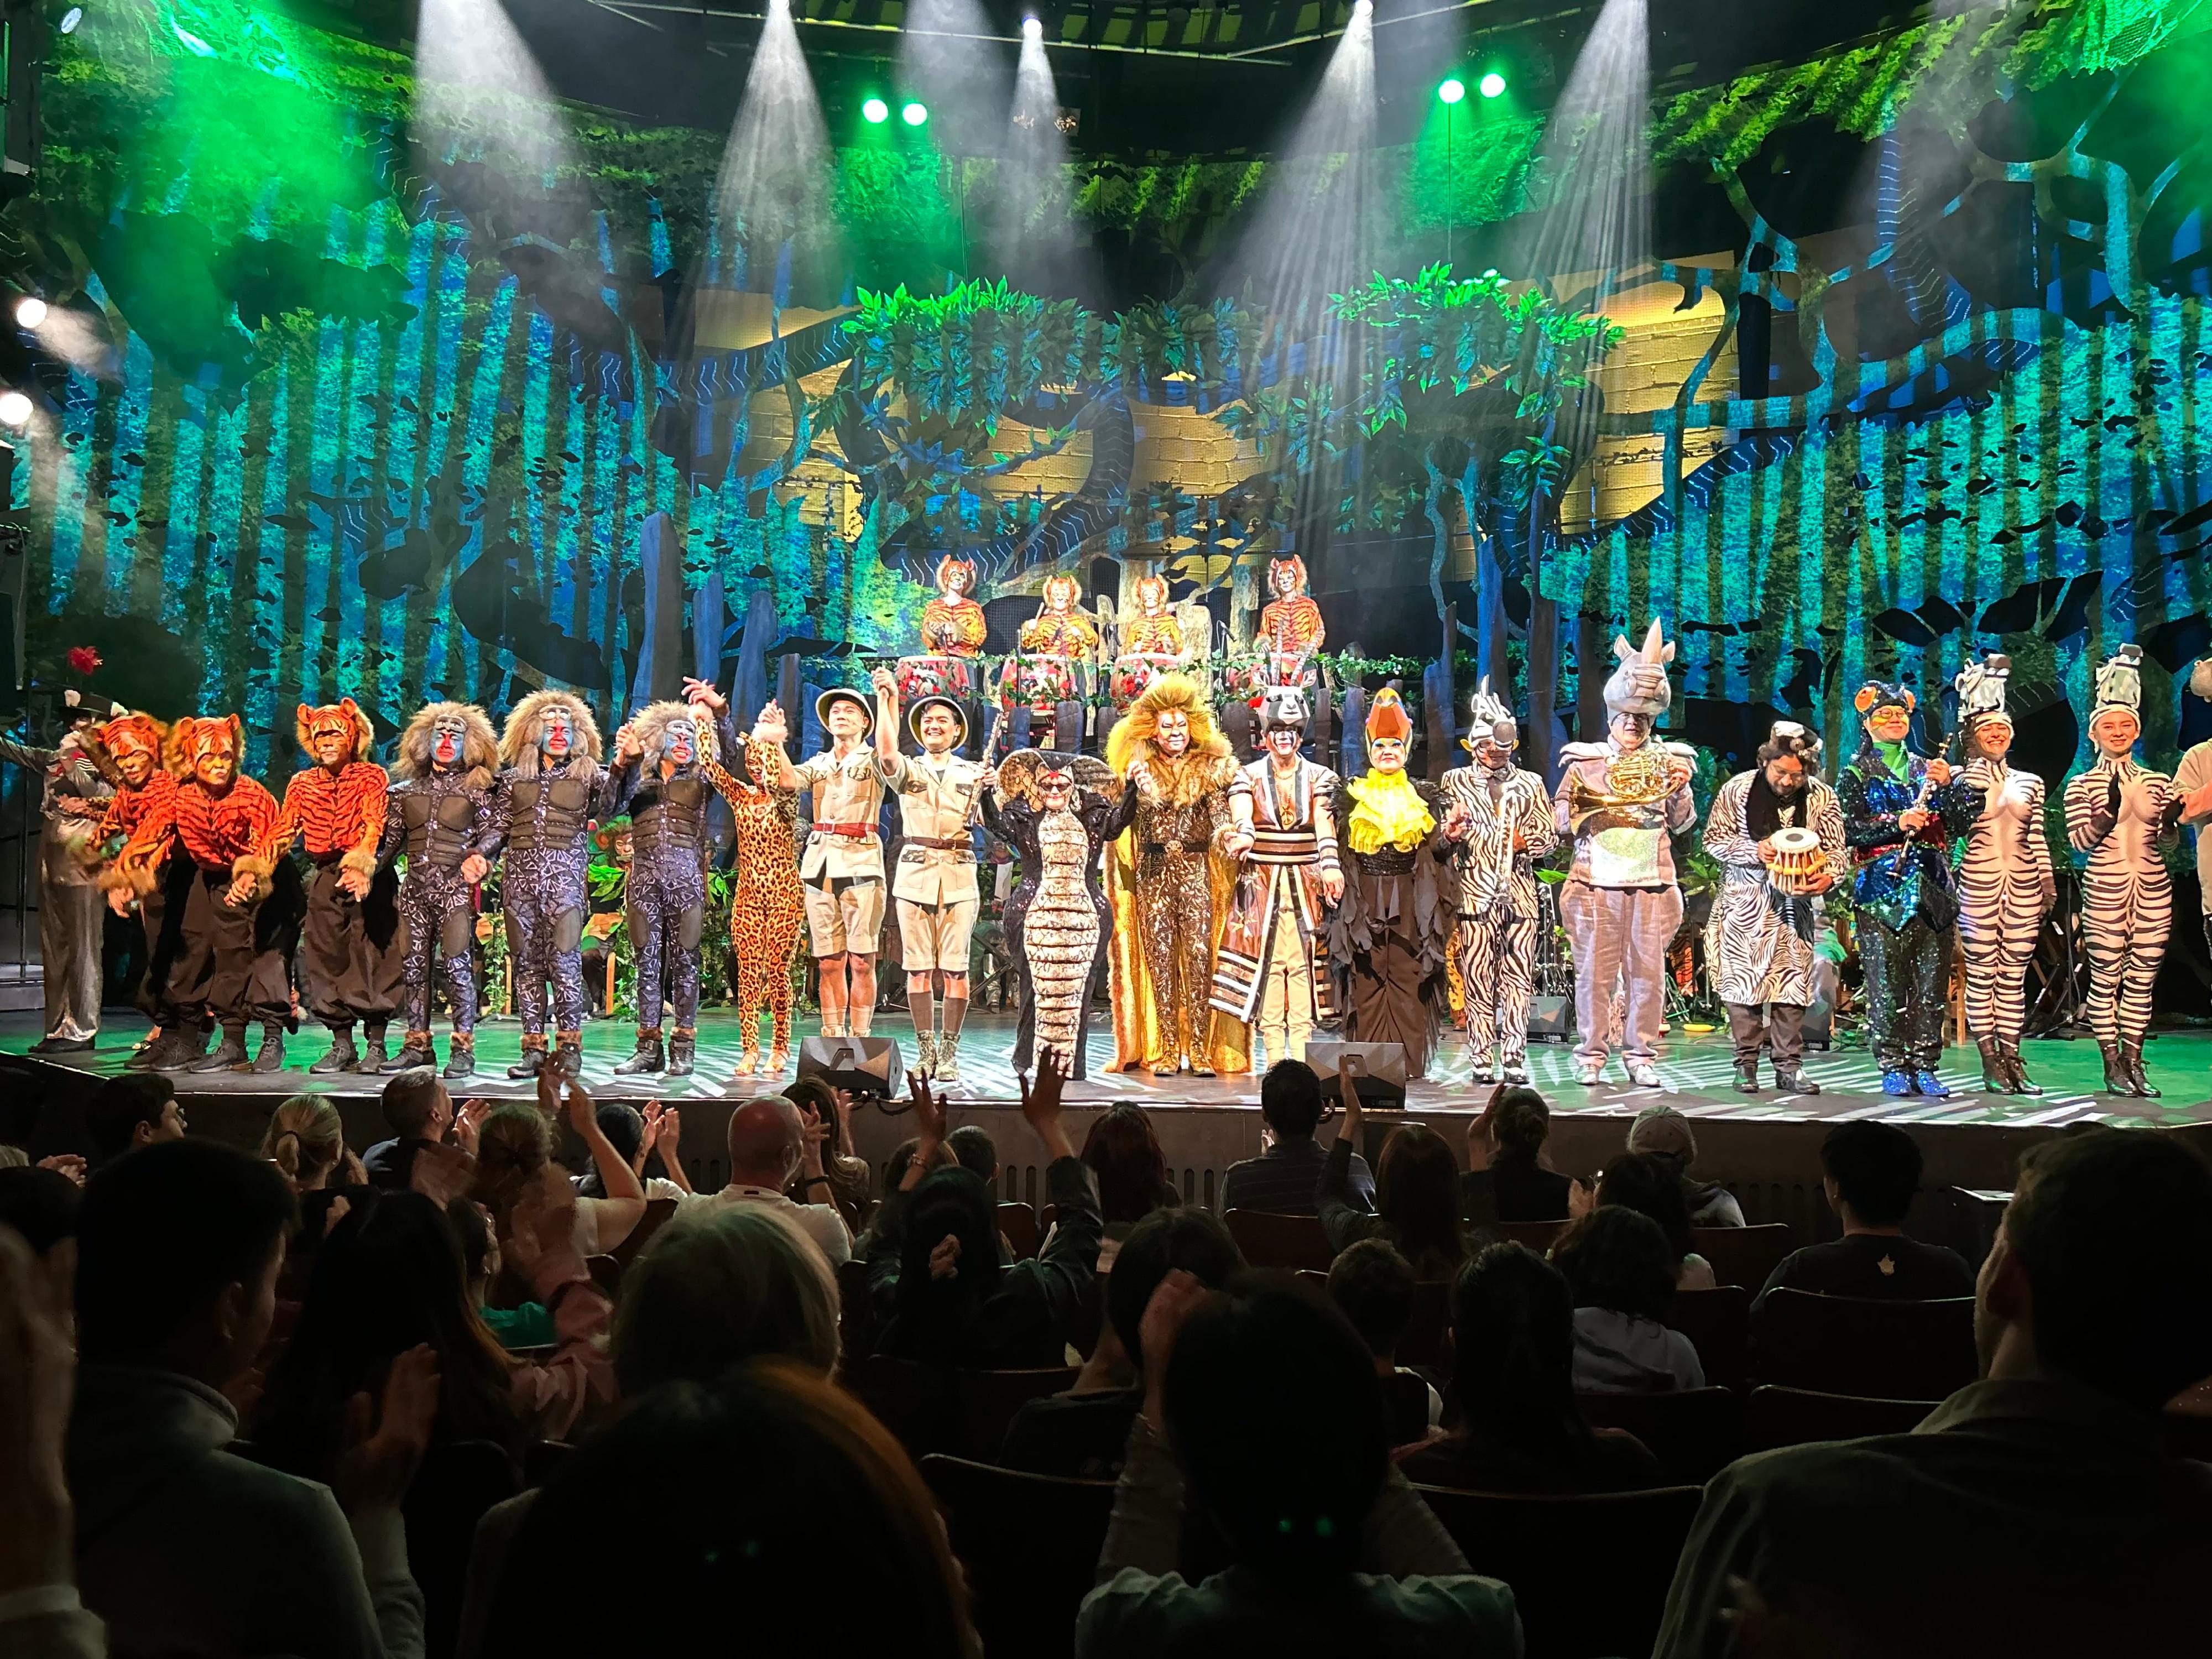 The Hong Kong Economic and Trade Office, London (London ETO) supported the UK premiere of WILD (The Musical), a captivating original production by the City Chamber Orchestra of Hong Kong (CCOHK), at the FUSE International festival at Rose Theatre, London on July 6 and 7 (London time). Photo shows the performers receiving curtain call from the audience.